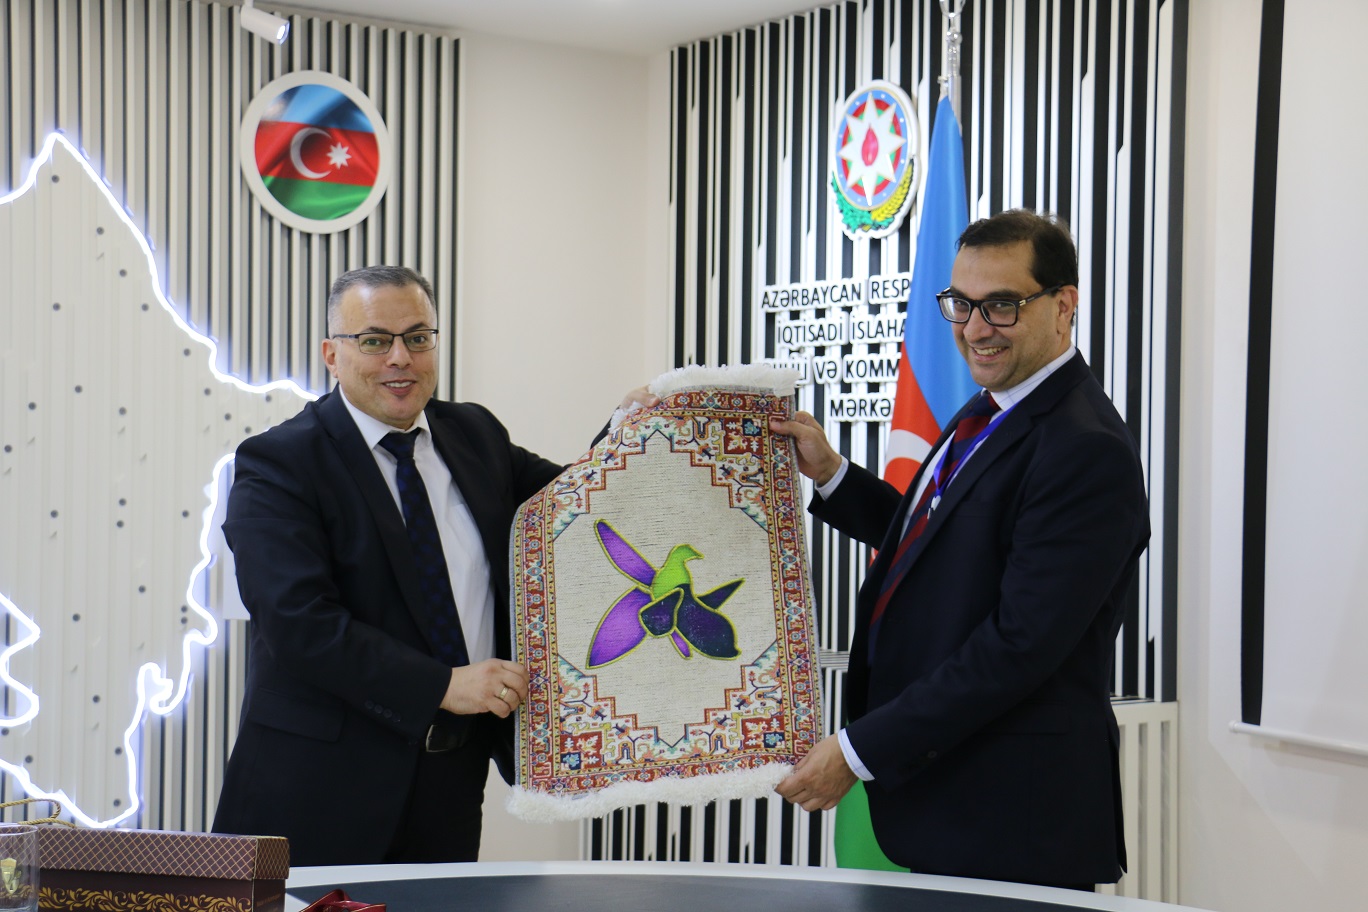 The head of the Central Asia Regional Economic Cooperation Organization visited CAERC